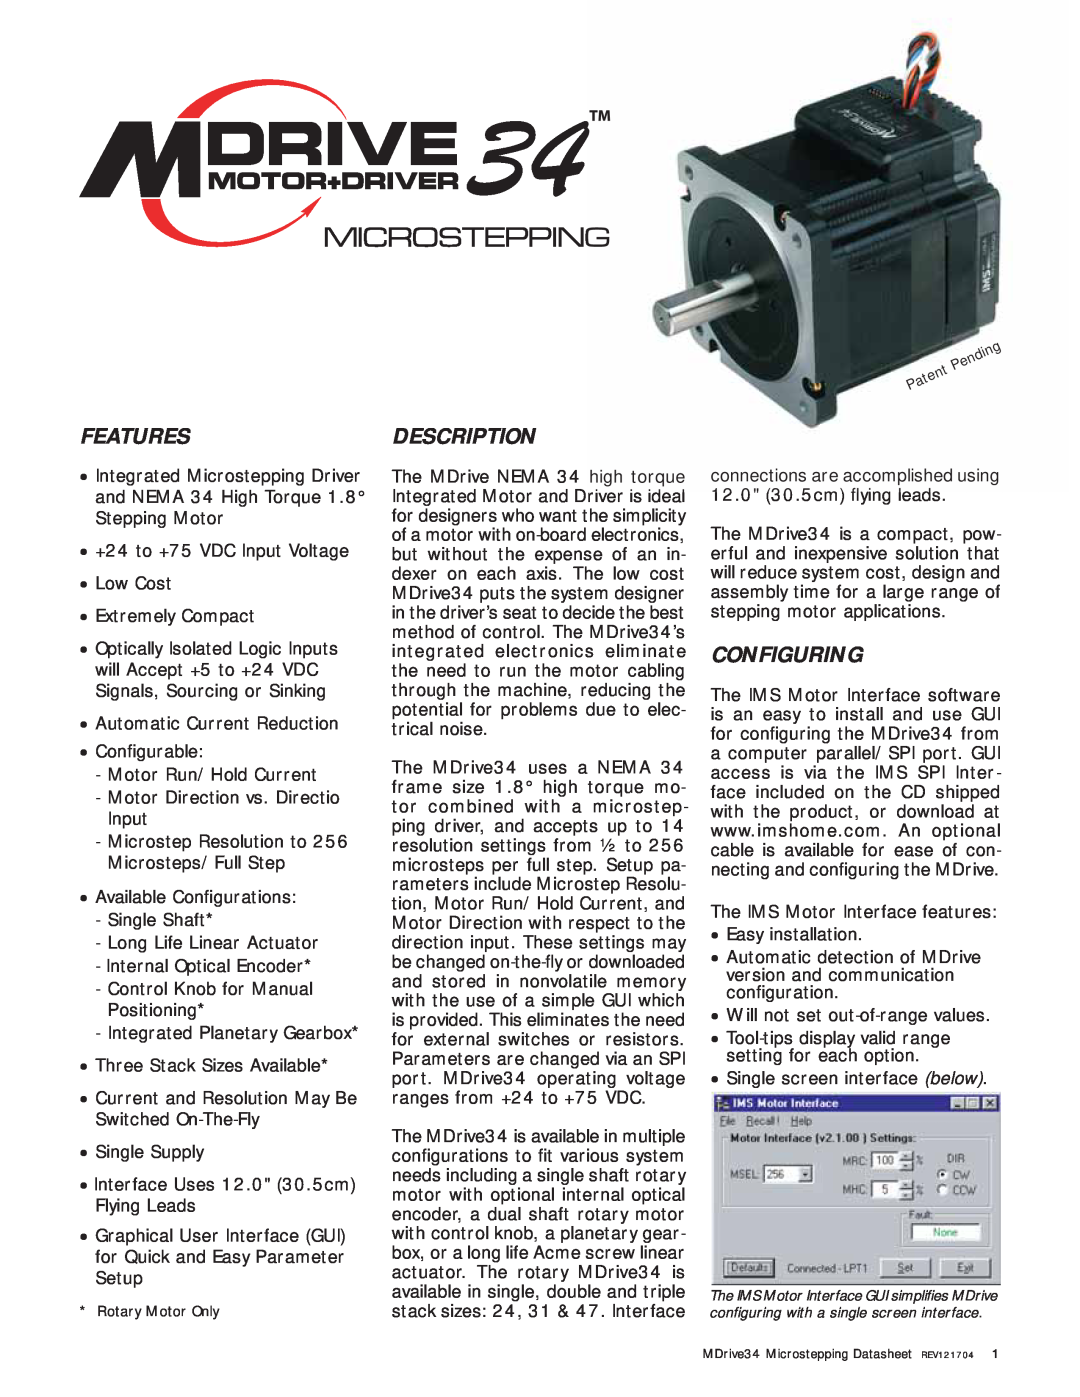 Intelligent Motion Systems MDrive34 manual Features, Description, Configuring, Microstepping 